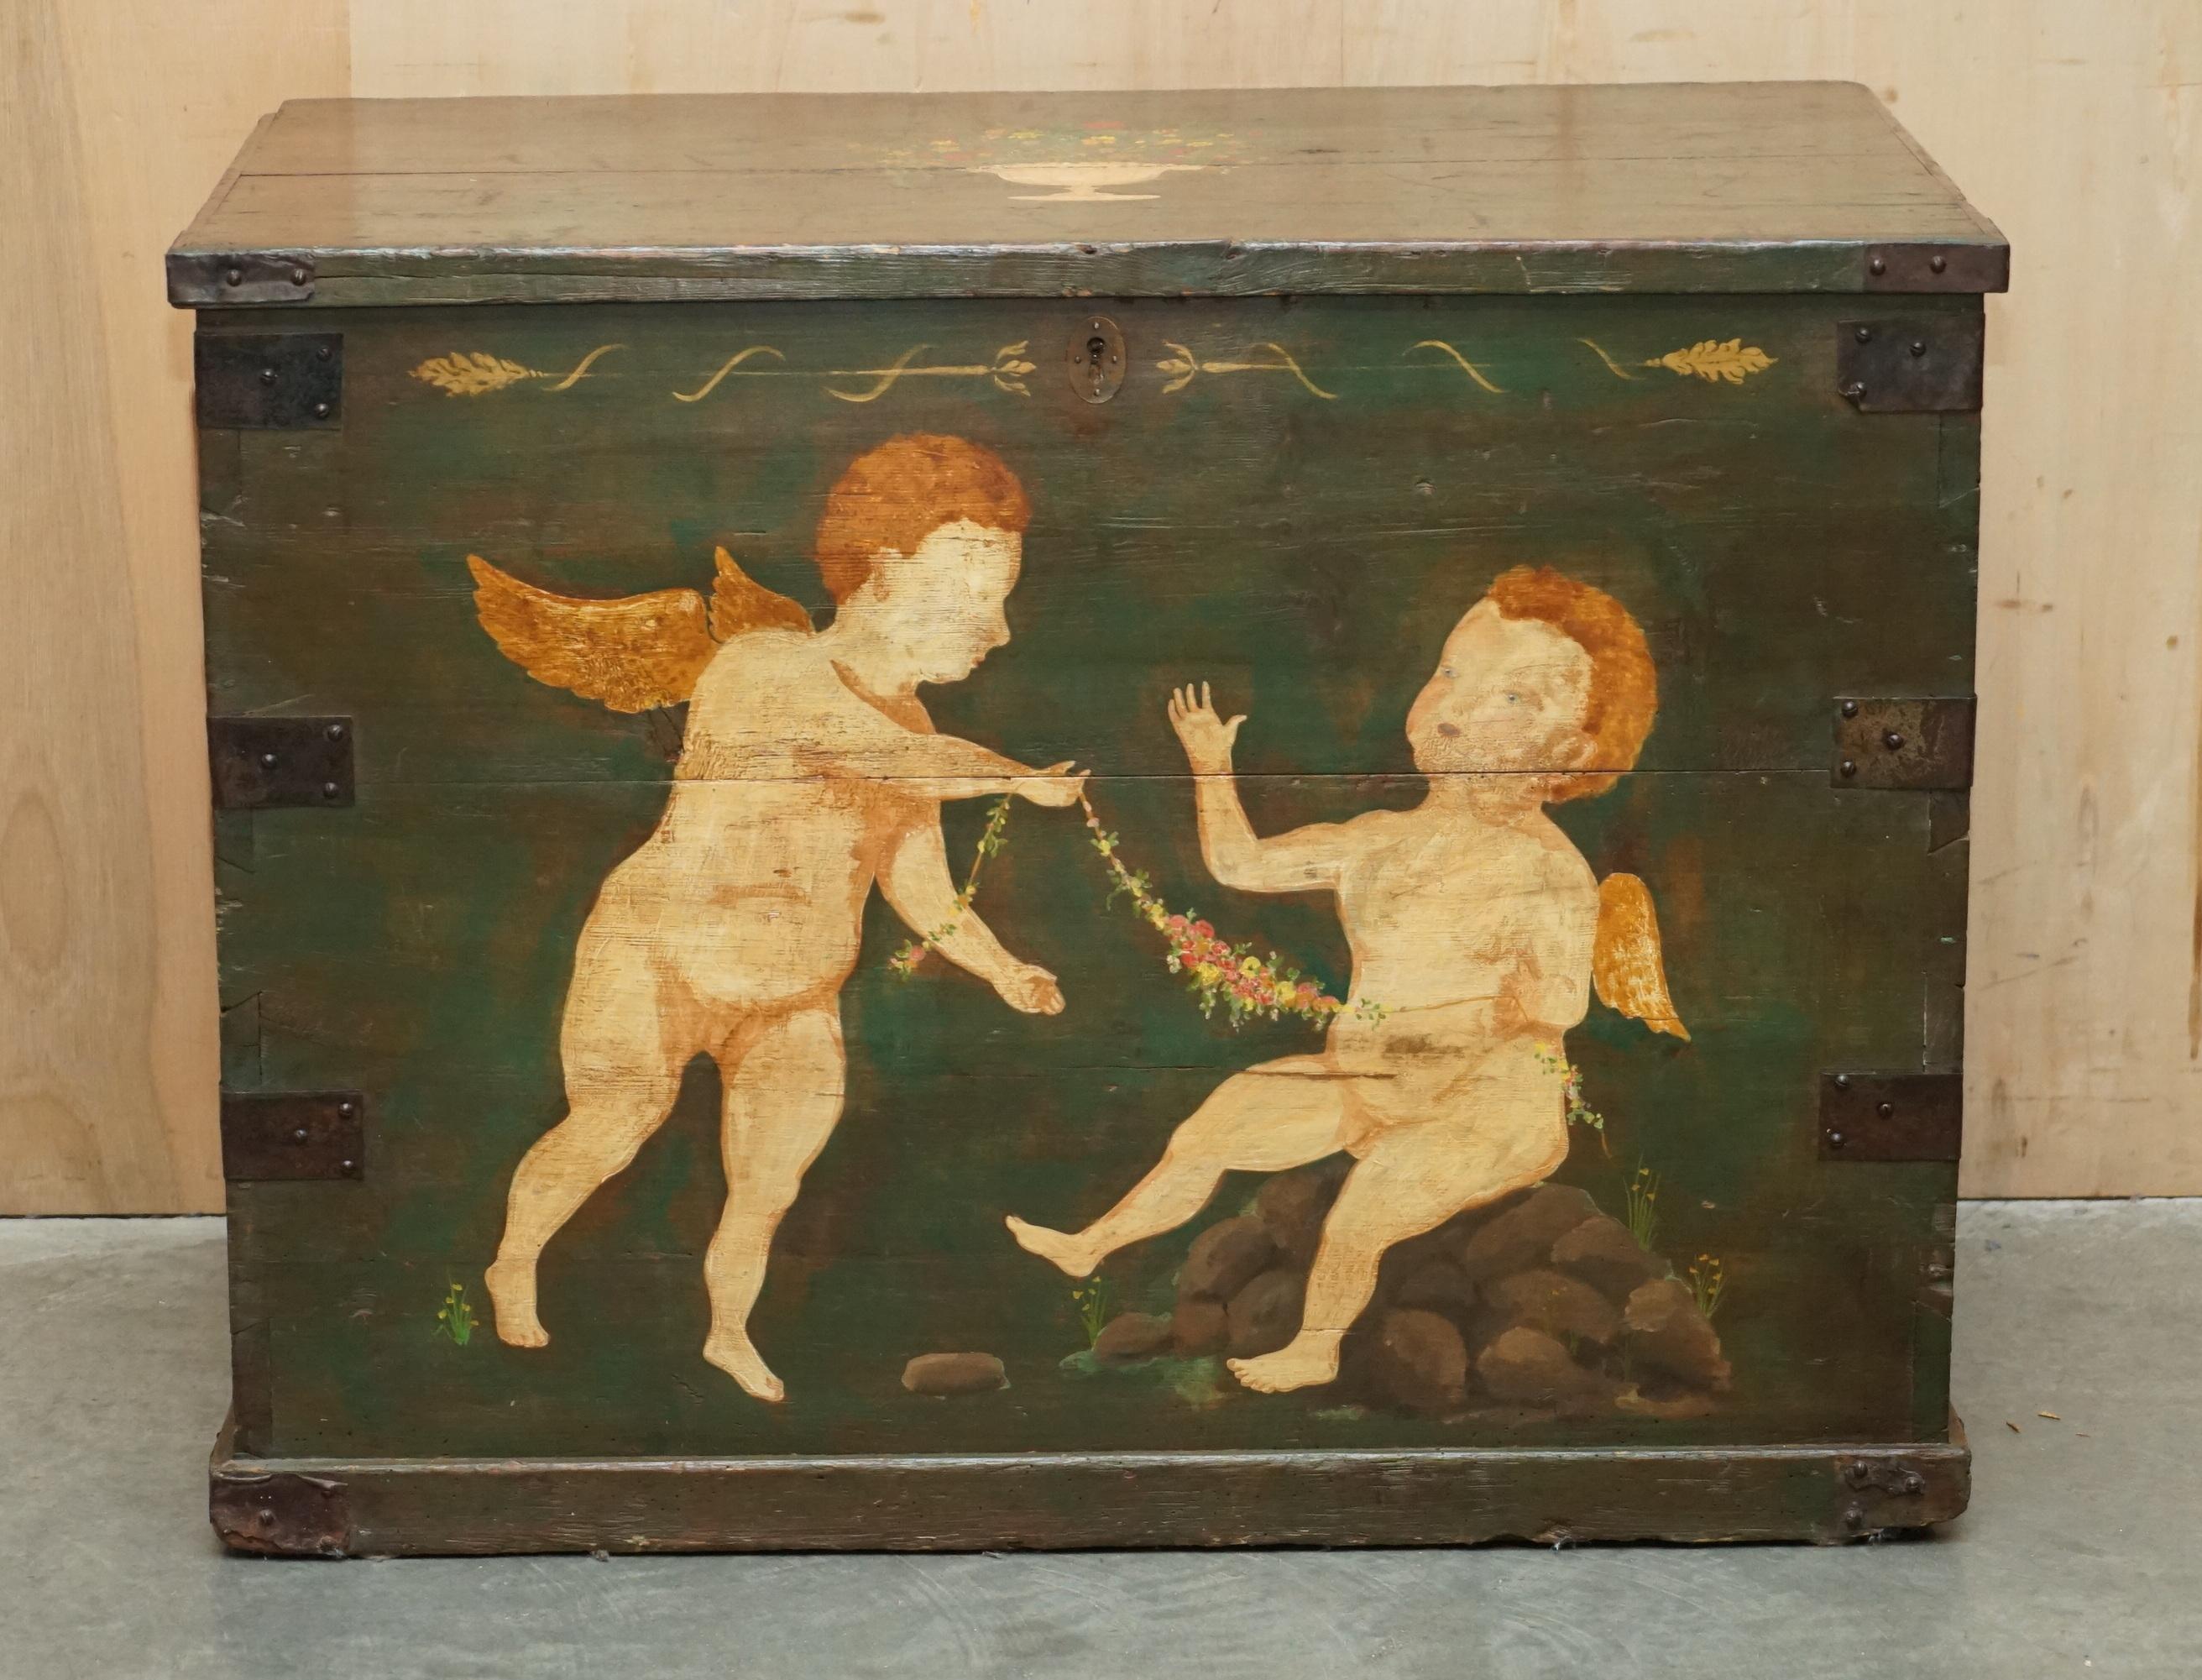 Royal House Antiques

Royal House Antiques is delighted to offer for sale this lovely original circa 1860's Italian hand painted storage trunk or chest depicting Cherubs 

Please note the delivery fee listed is just a guide, it covers within the M25